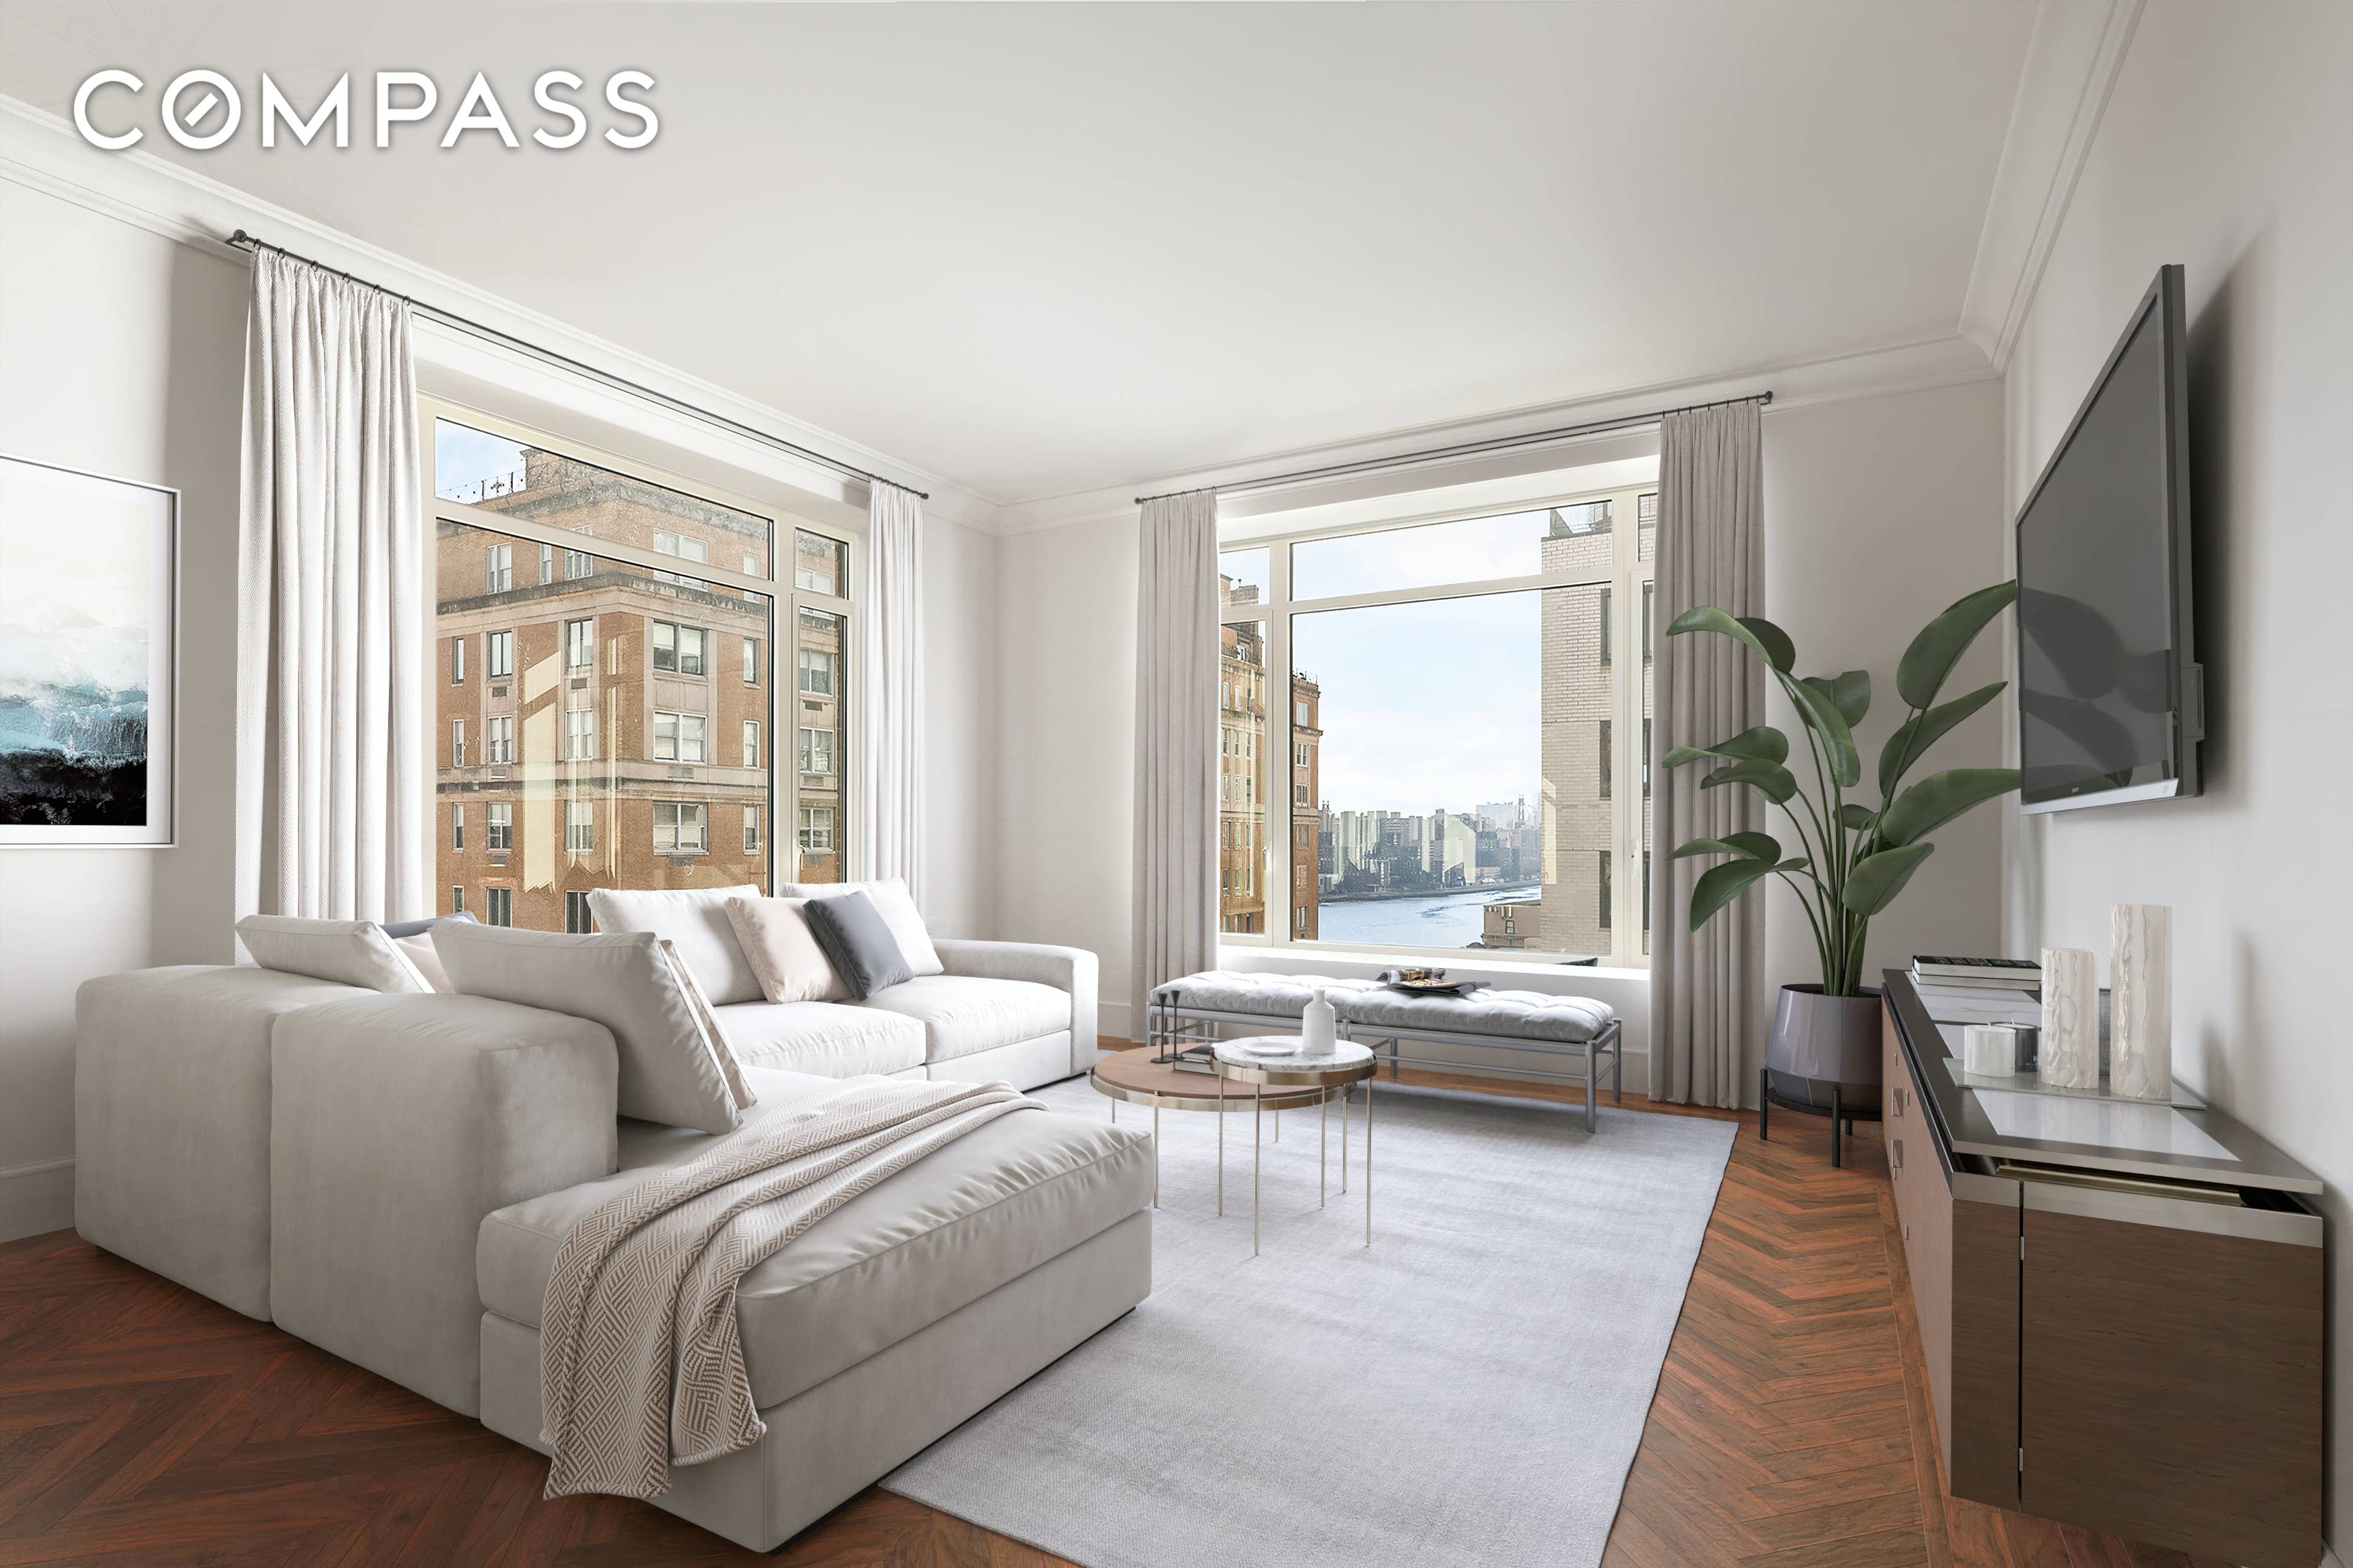 RARE OPPORTUNITY TO ACQUIRE A VALUABLE HIGH FLOOR B LINE RESIDENCE IN ONE OF NEW YORK S MOST CELEBRATED BUILDINGS With striking East River views from Southern and Eastern exposures, ...